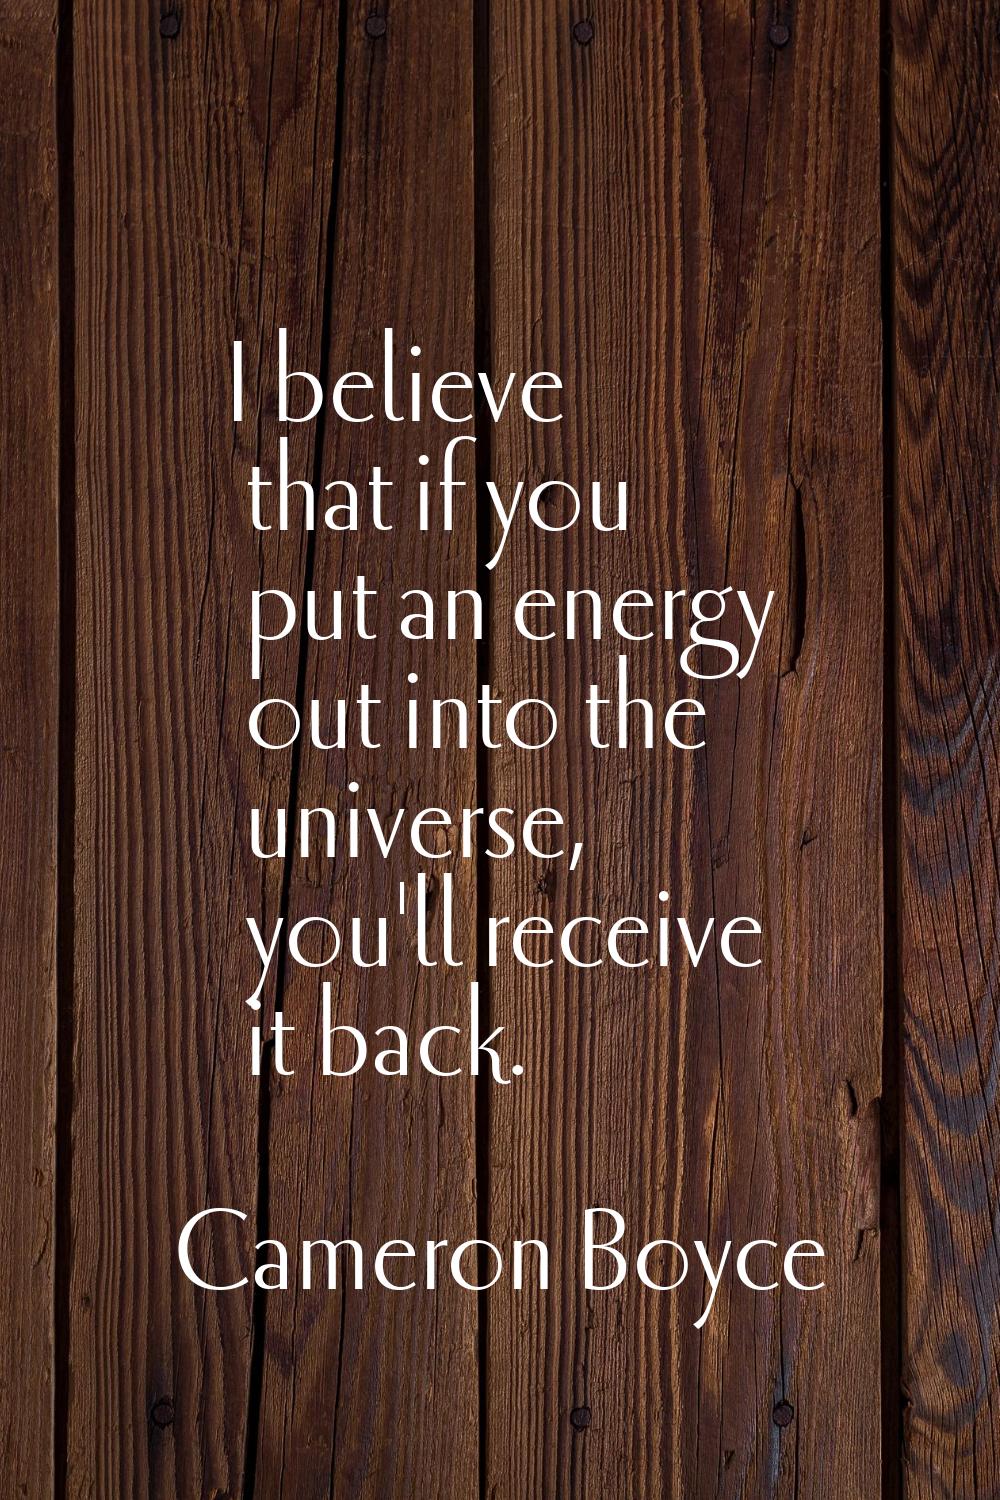 I believe that if you put an energy out into the universe, you'll receive it back.